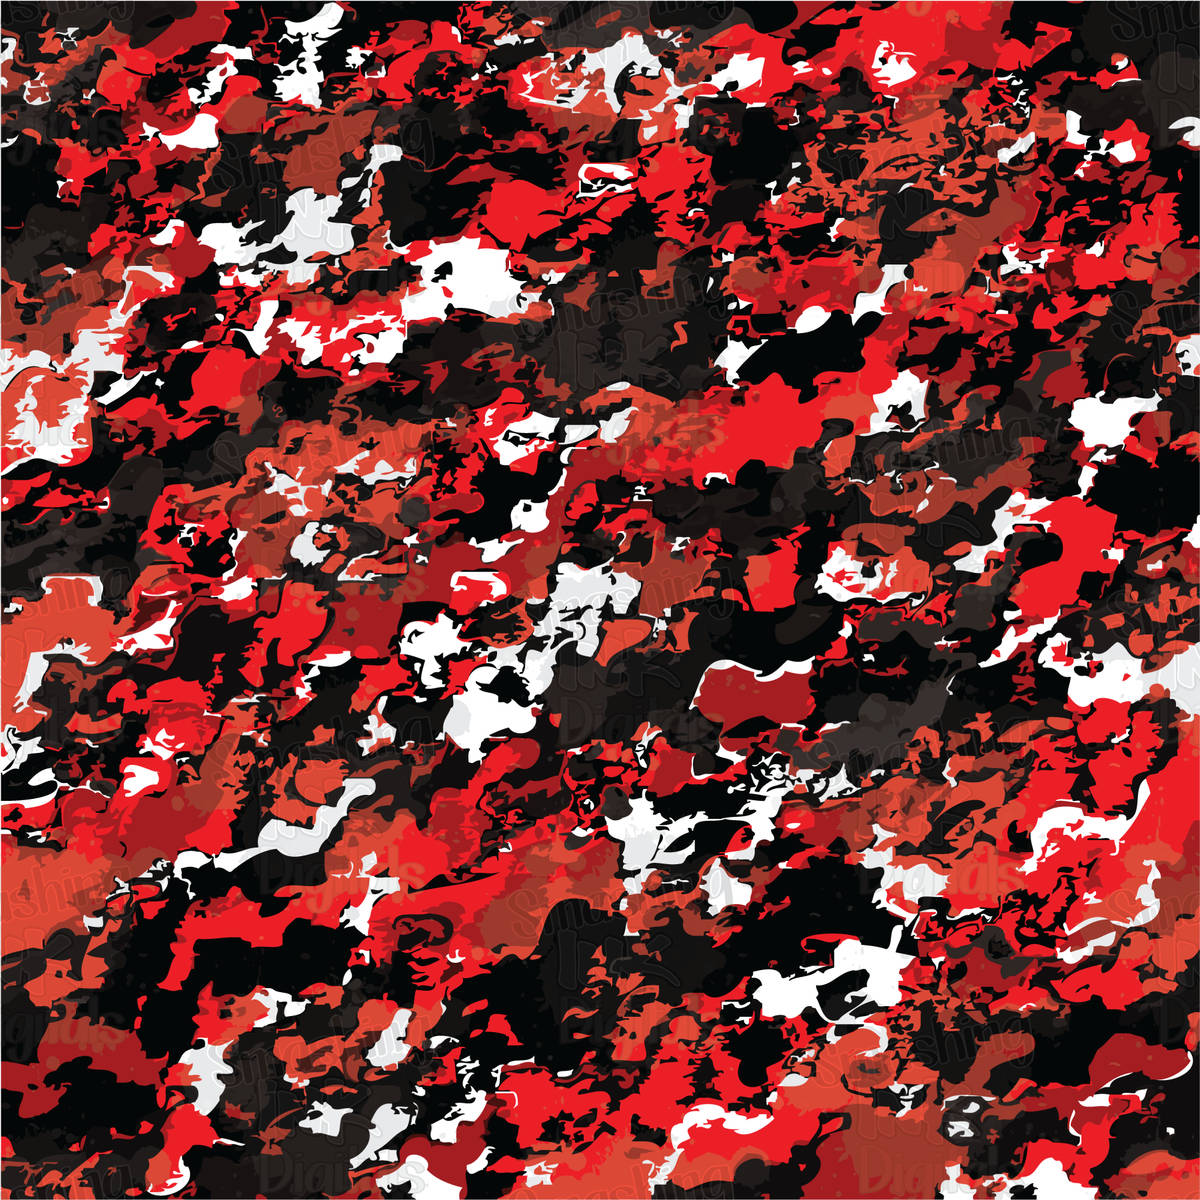 Download Ready for battle: the fire-resistant Red Camo Wallpaper